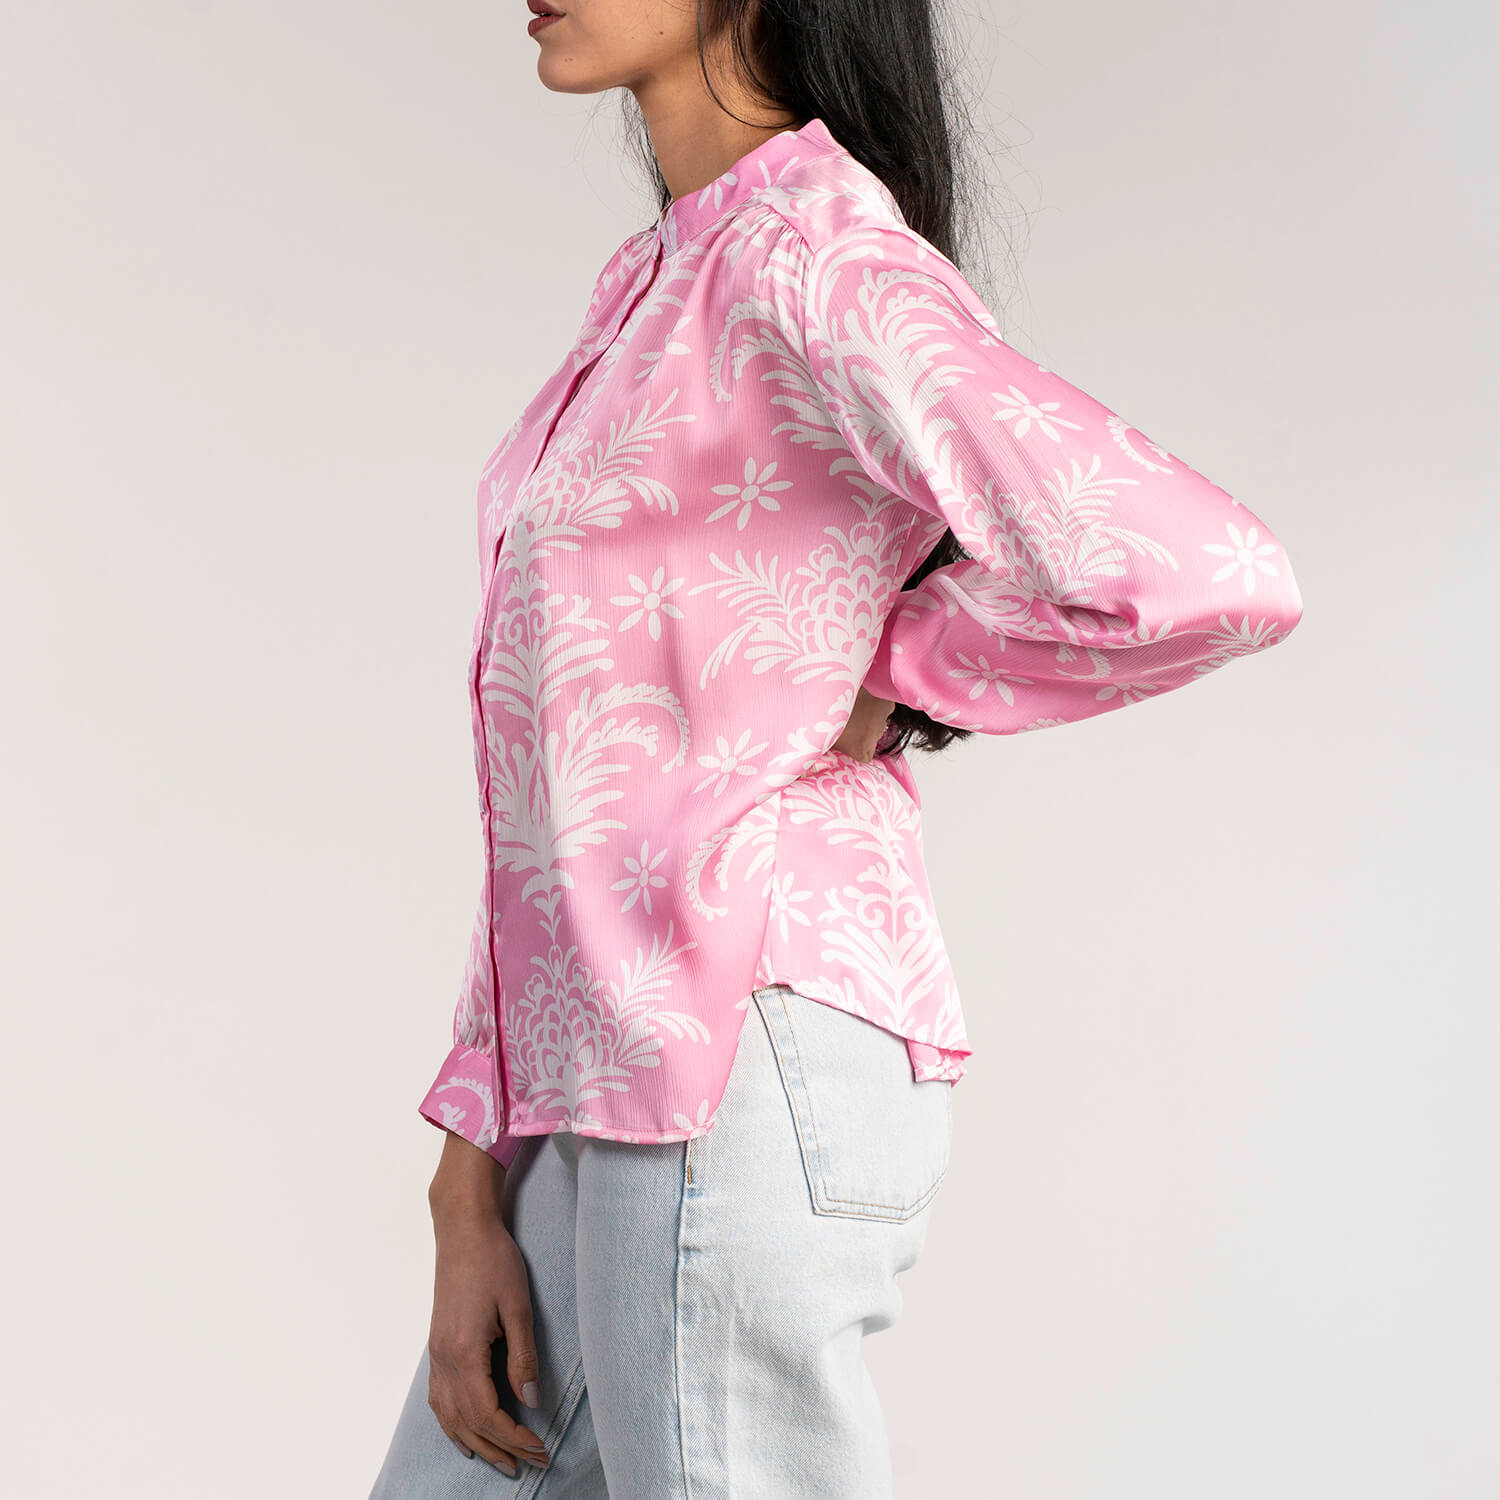 Naoise Print Crepe Blouse - Pink 2 Shaws Department Stores